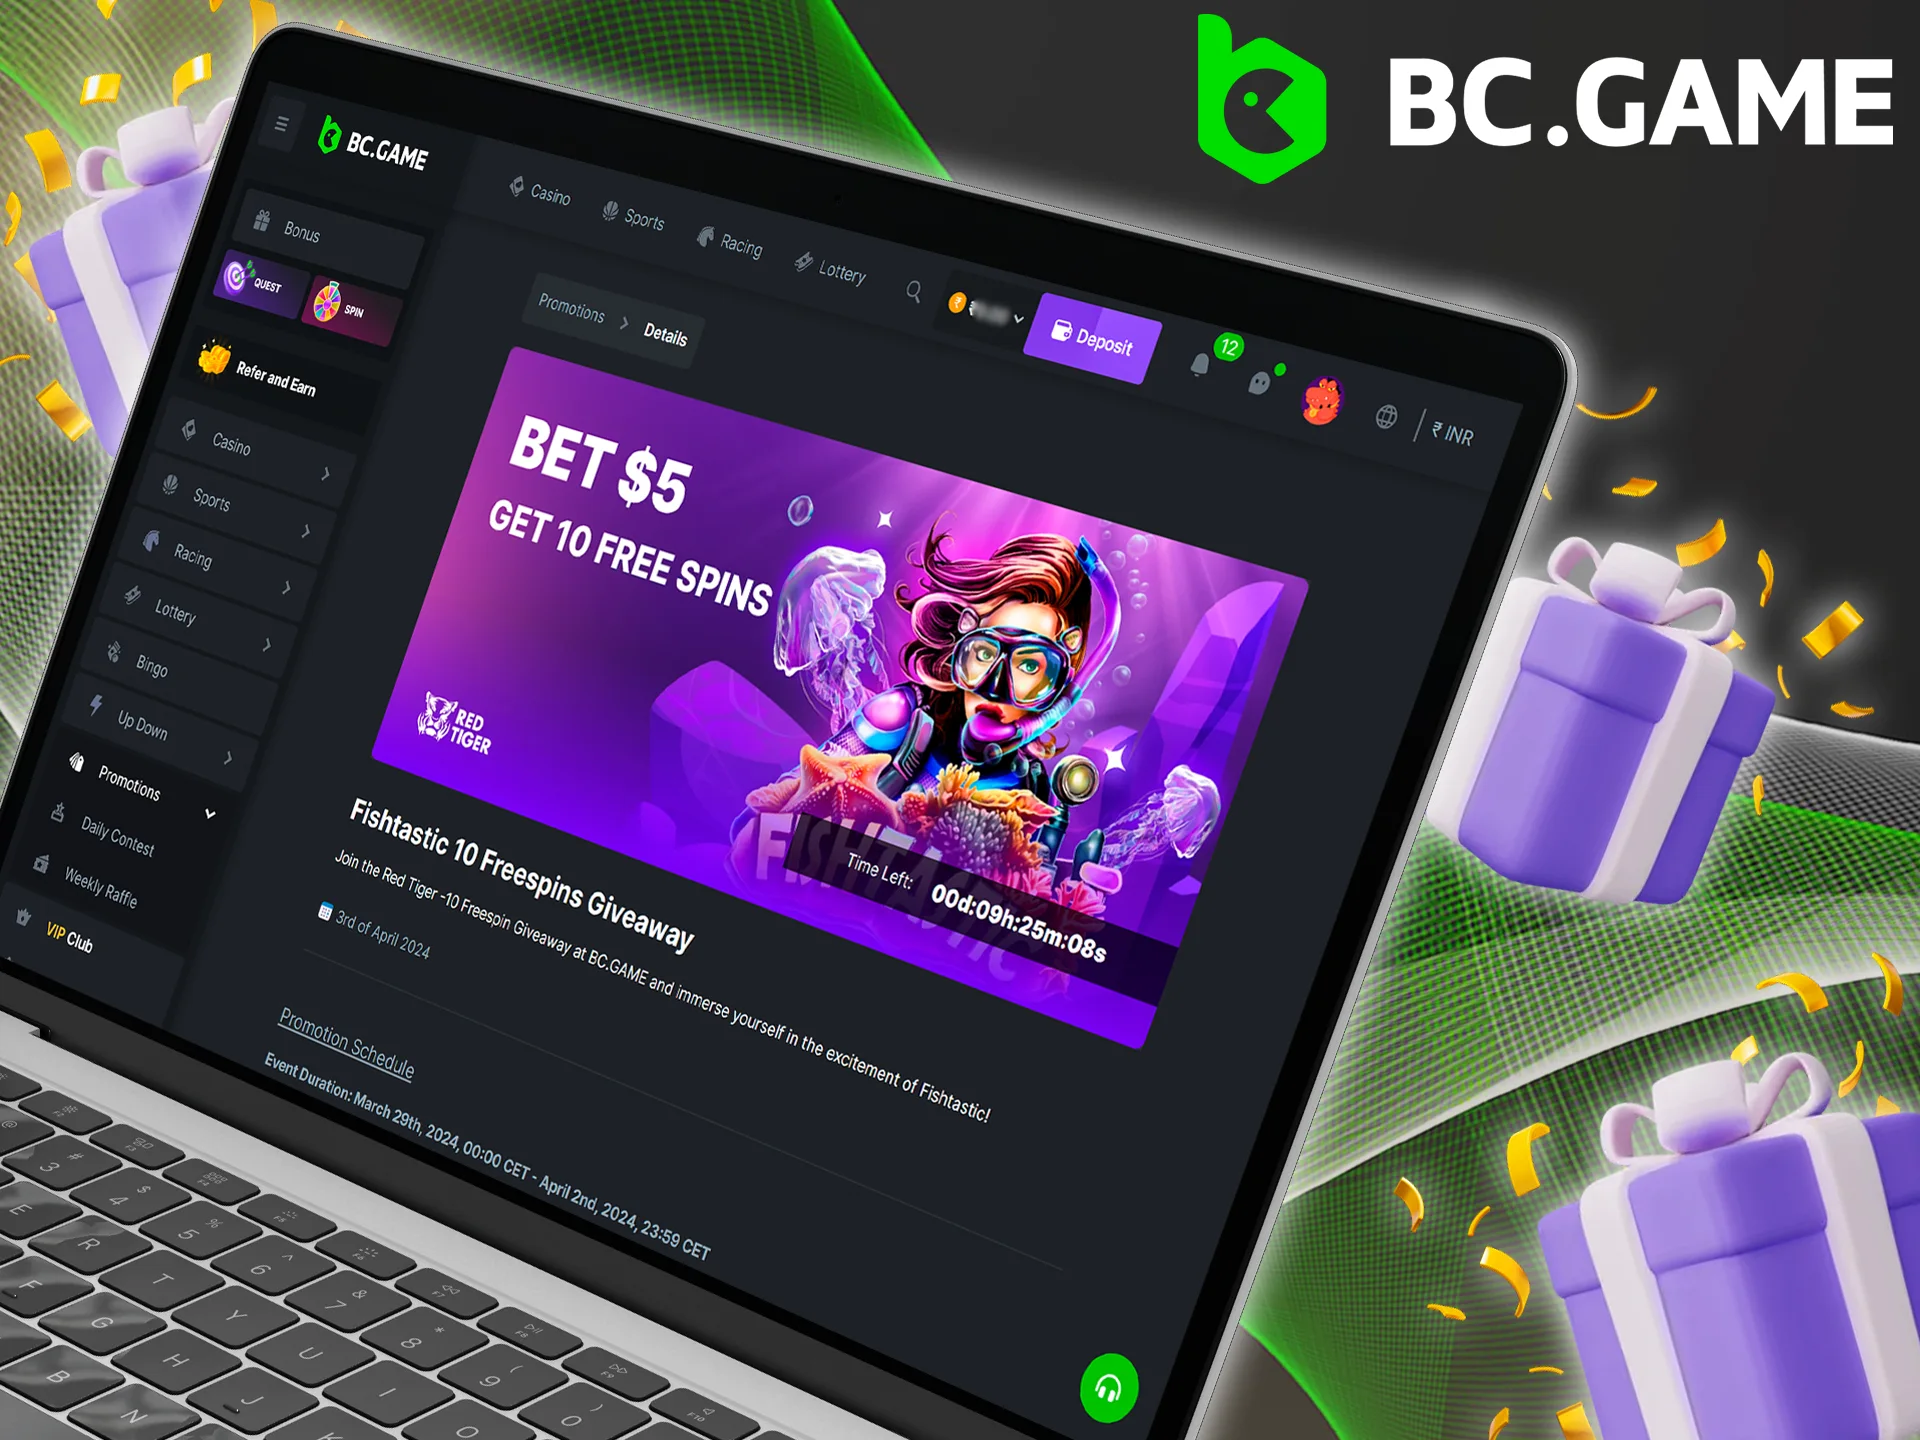 Wager the required amount and get free spins at BC Game.